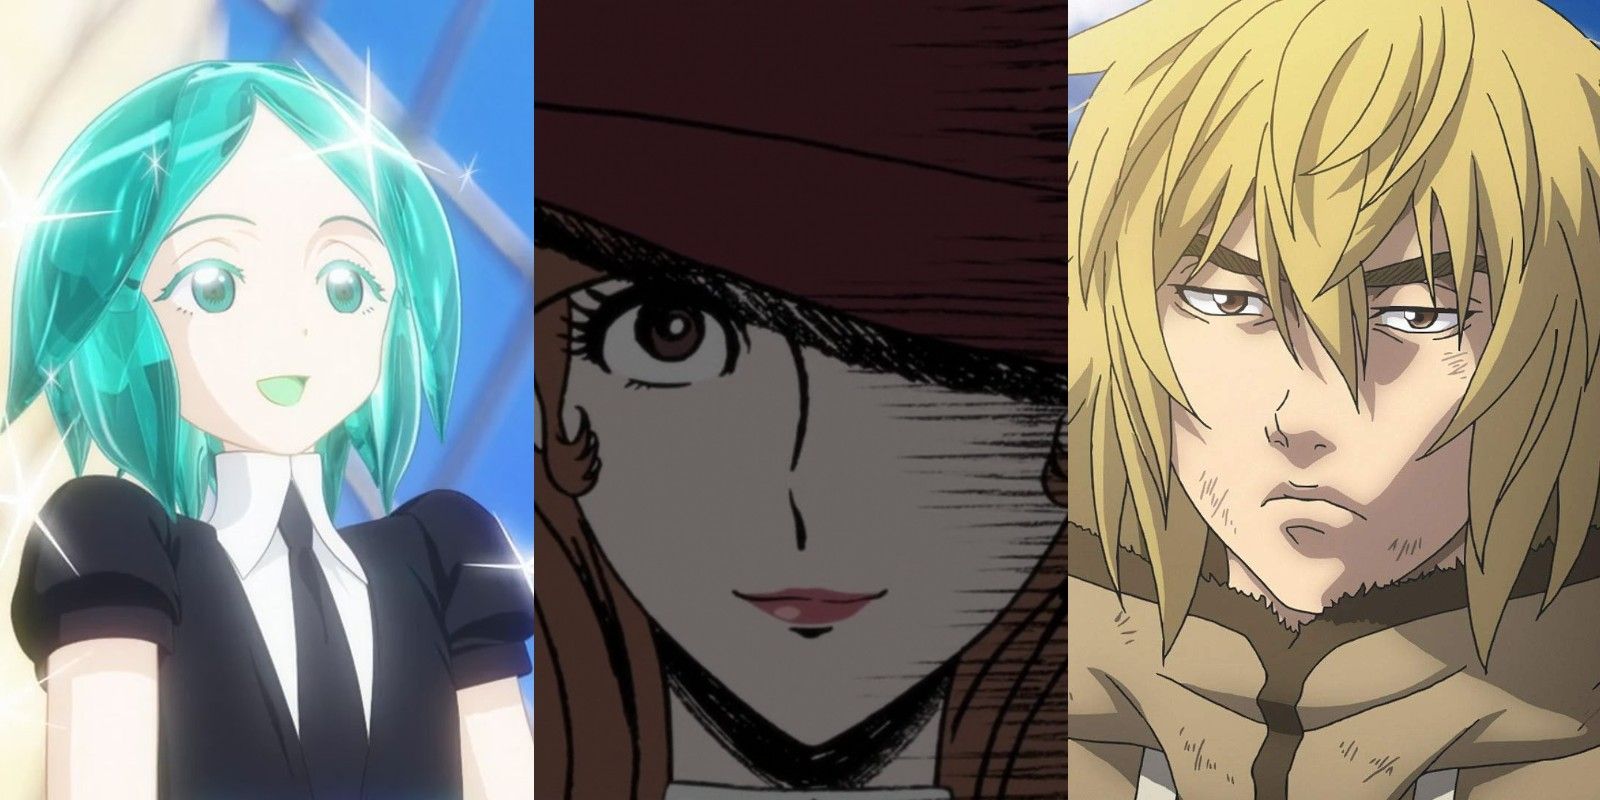 Land of the Lustrous, Lupin the Third A Woman Named Fujiko, and Vinland Saga